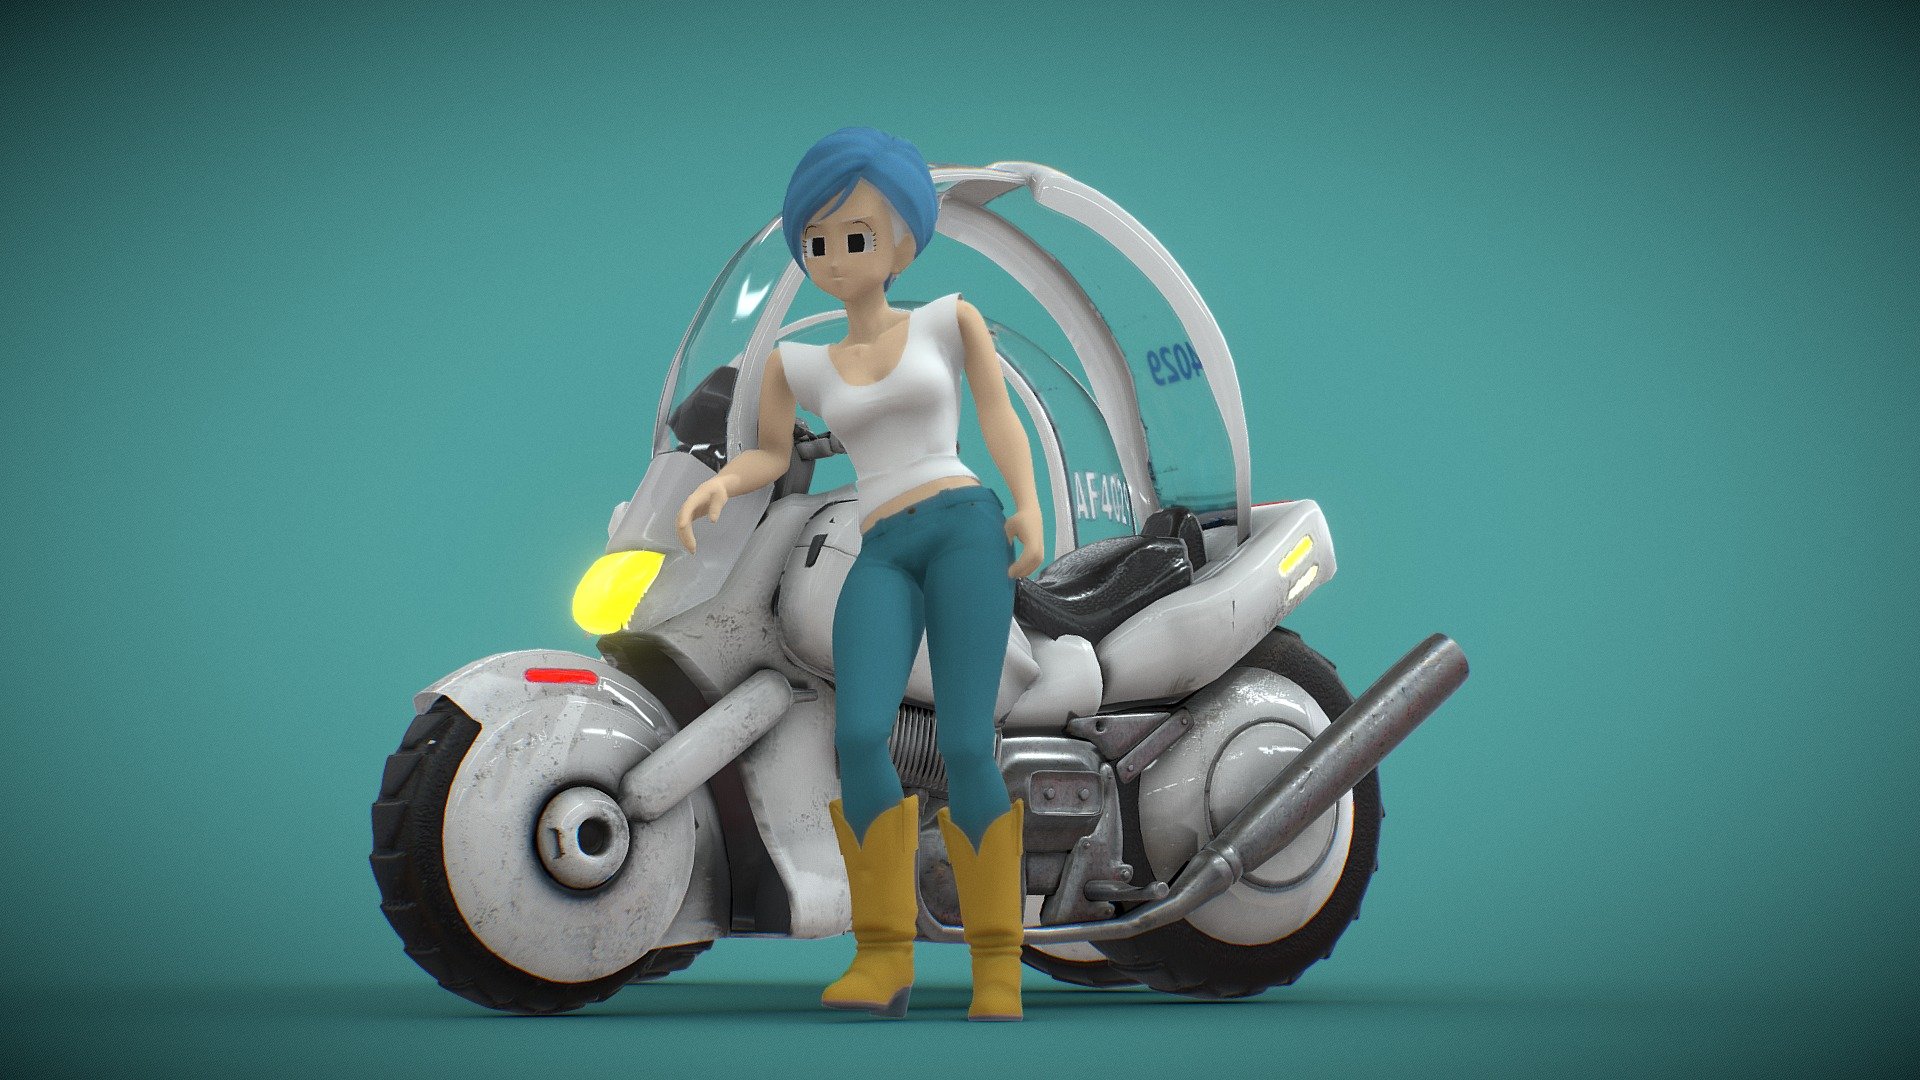 Appearing in the first episode of the Dragon Ball series, Bulma’s Capsule No. 9 Bike
Debut:
Manga: &ldquo;Bloomers and the Monkey King